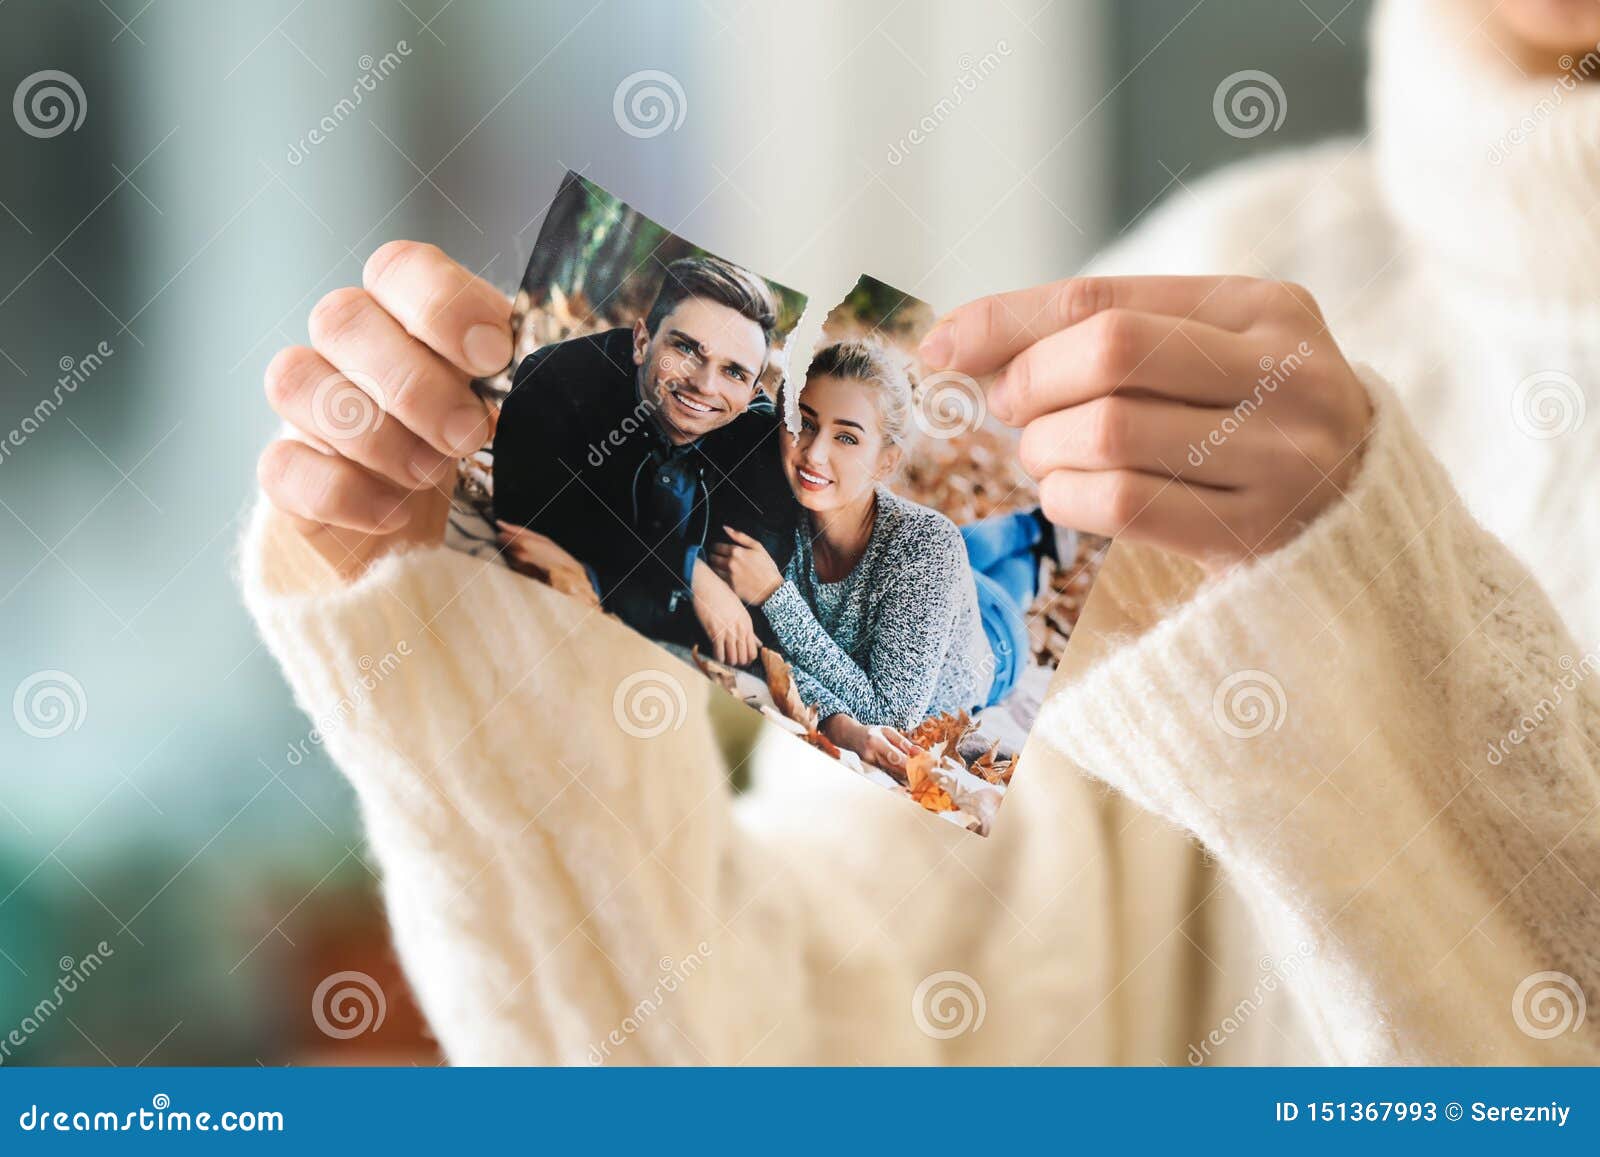 woman tearing up photo of happy couple, closeup. concept of divorce